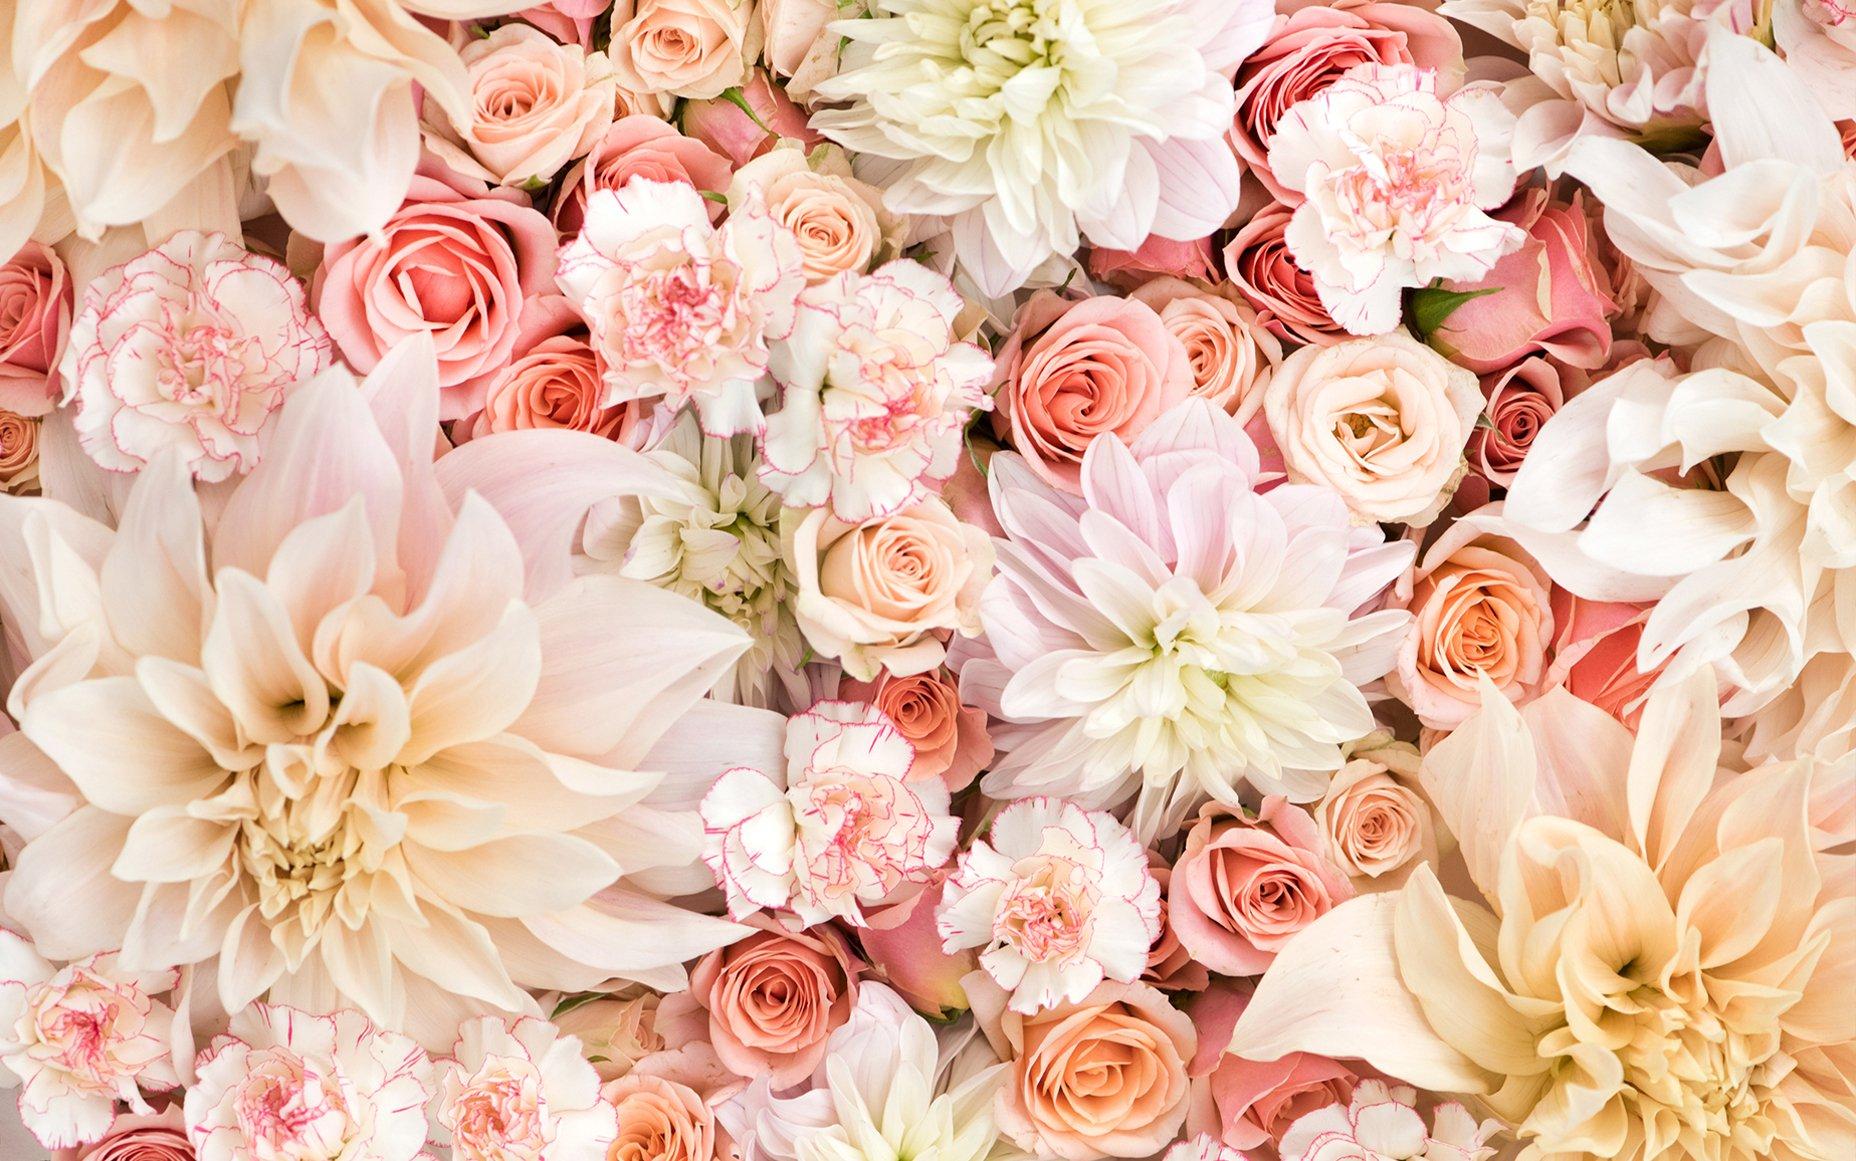 Dahlias, Roses, and Carnations in Pastels Wallpaper and Background